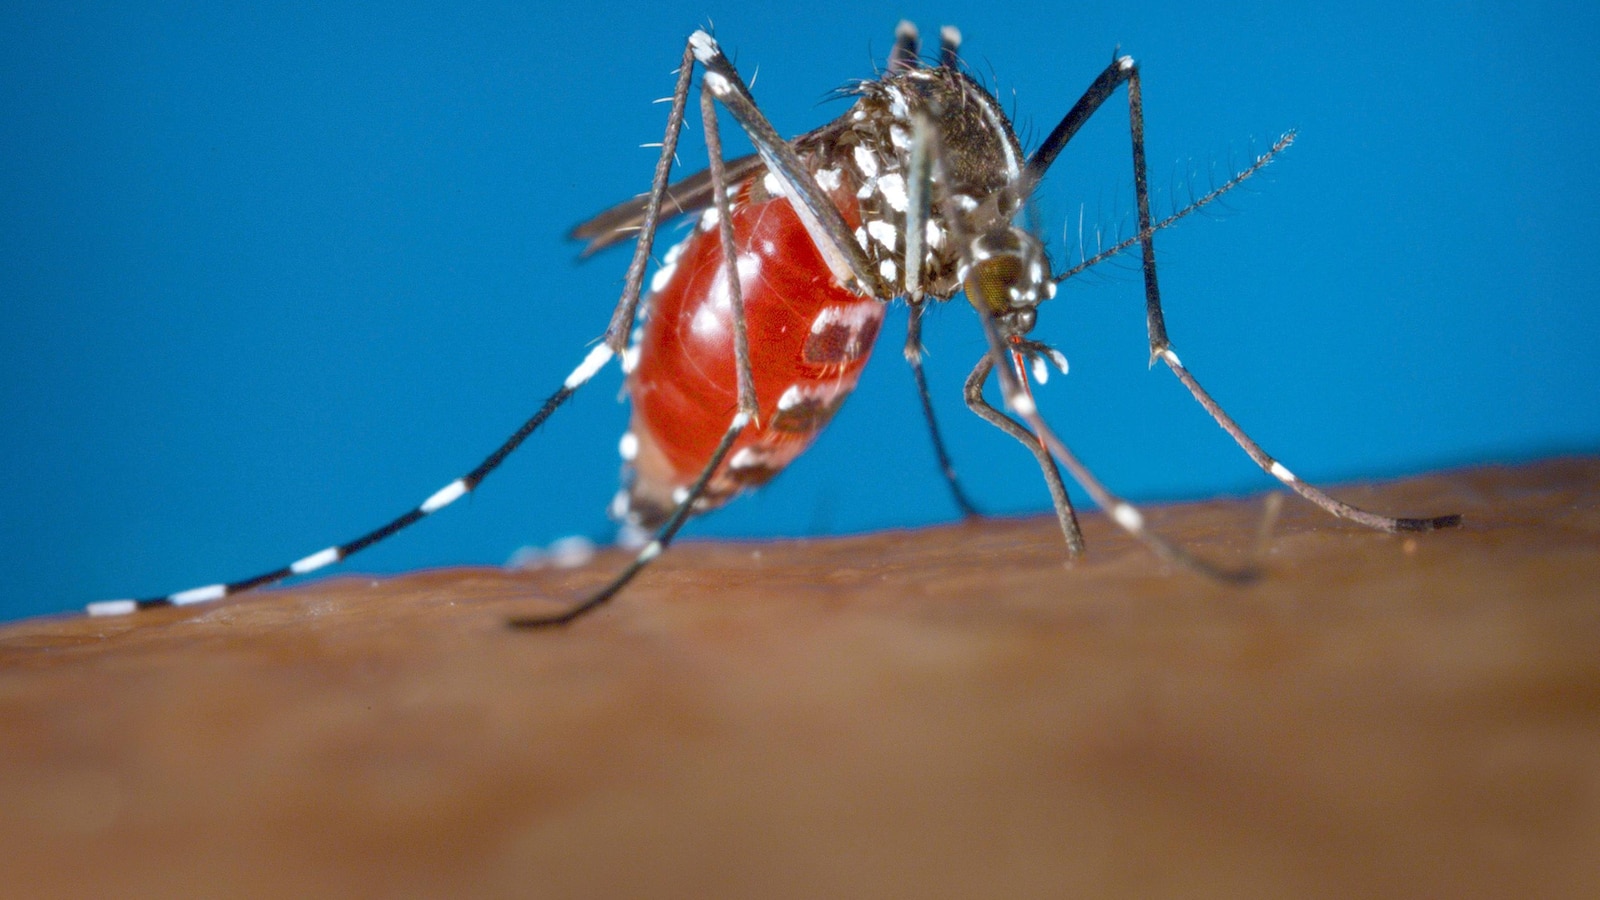 Health officials tell US doctors to be alert for dengue as cases ramp up worldwide